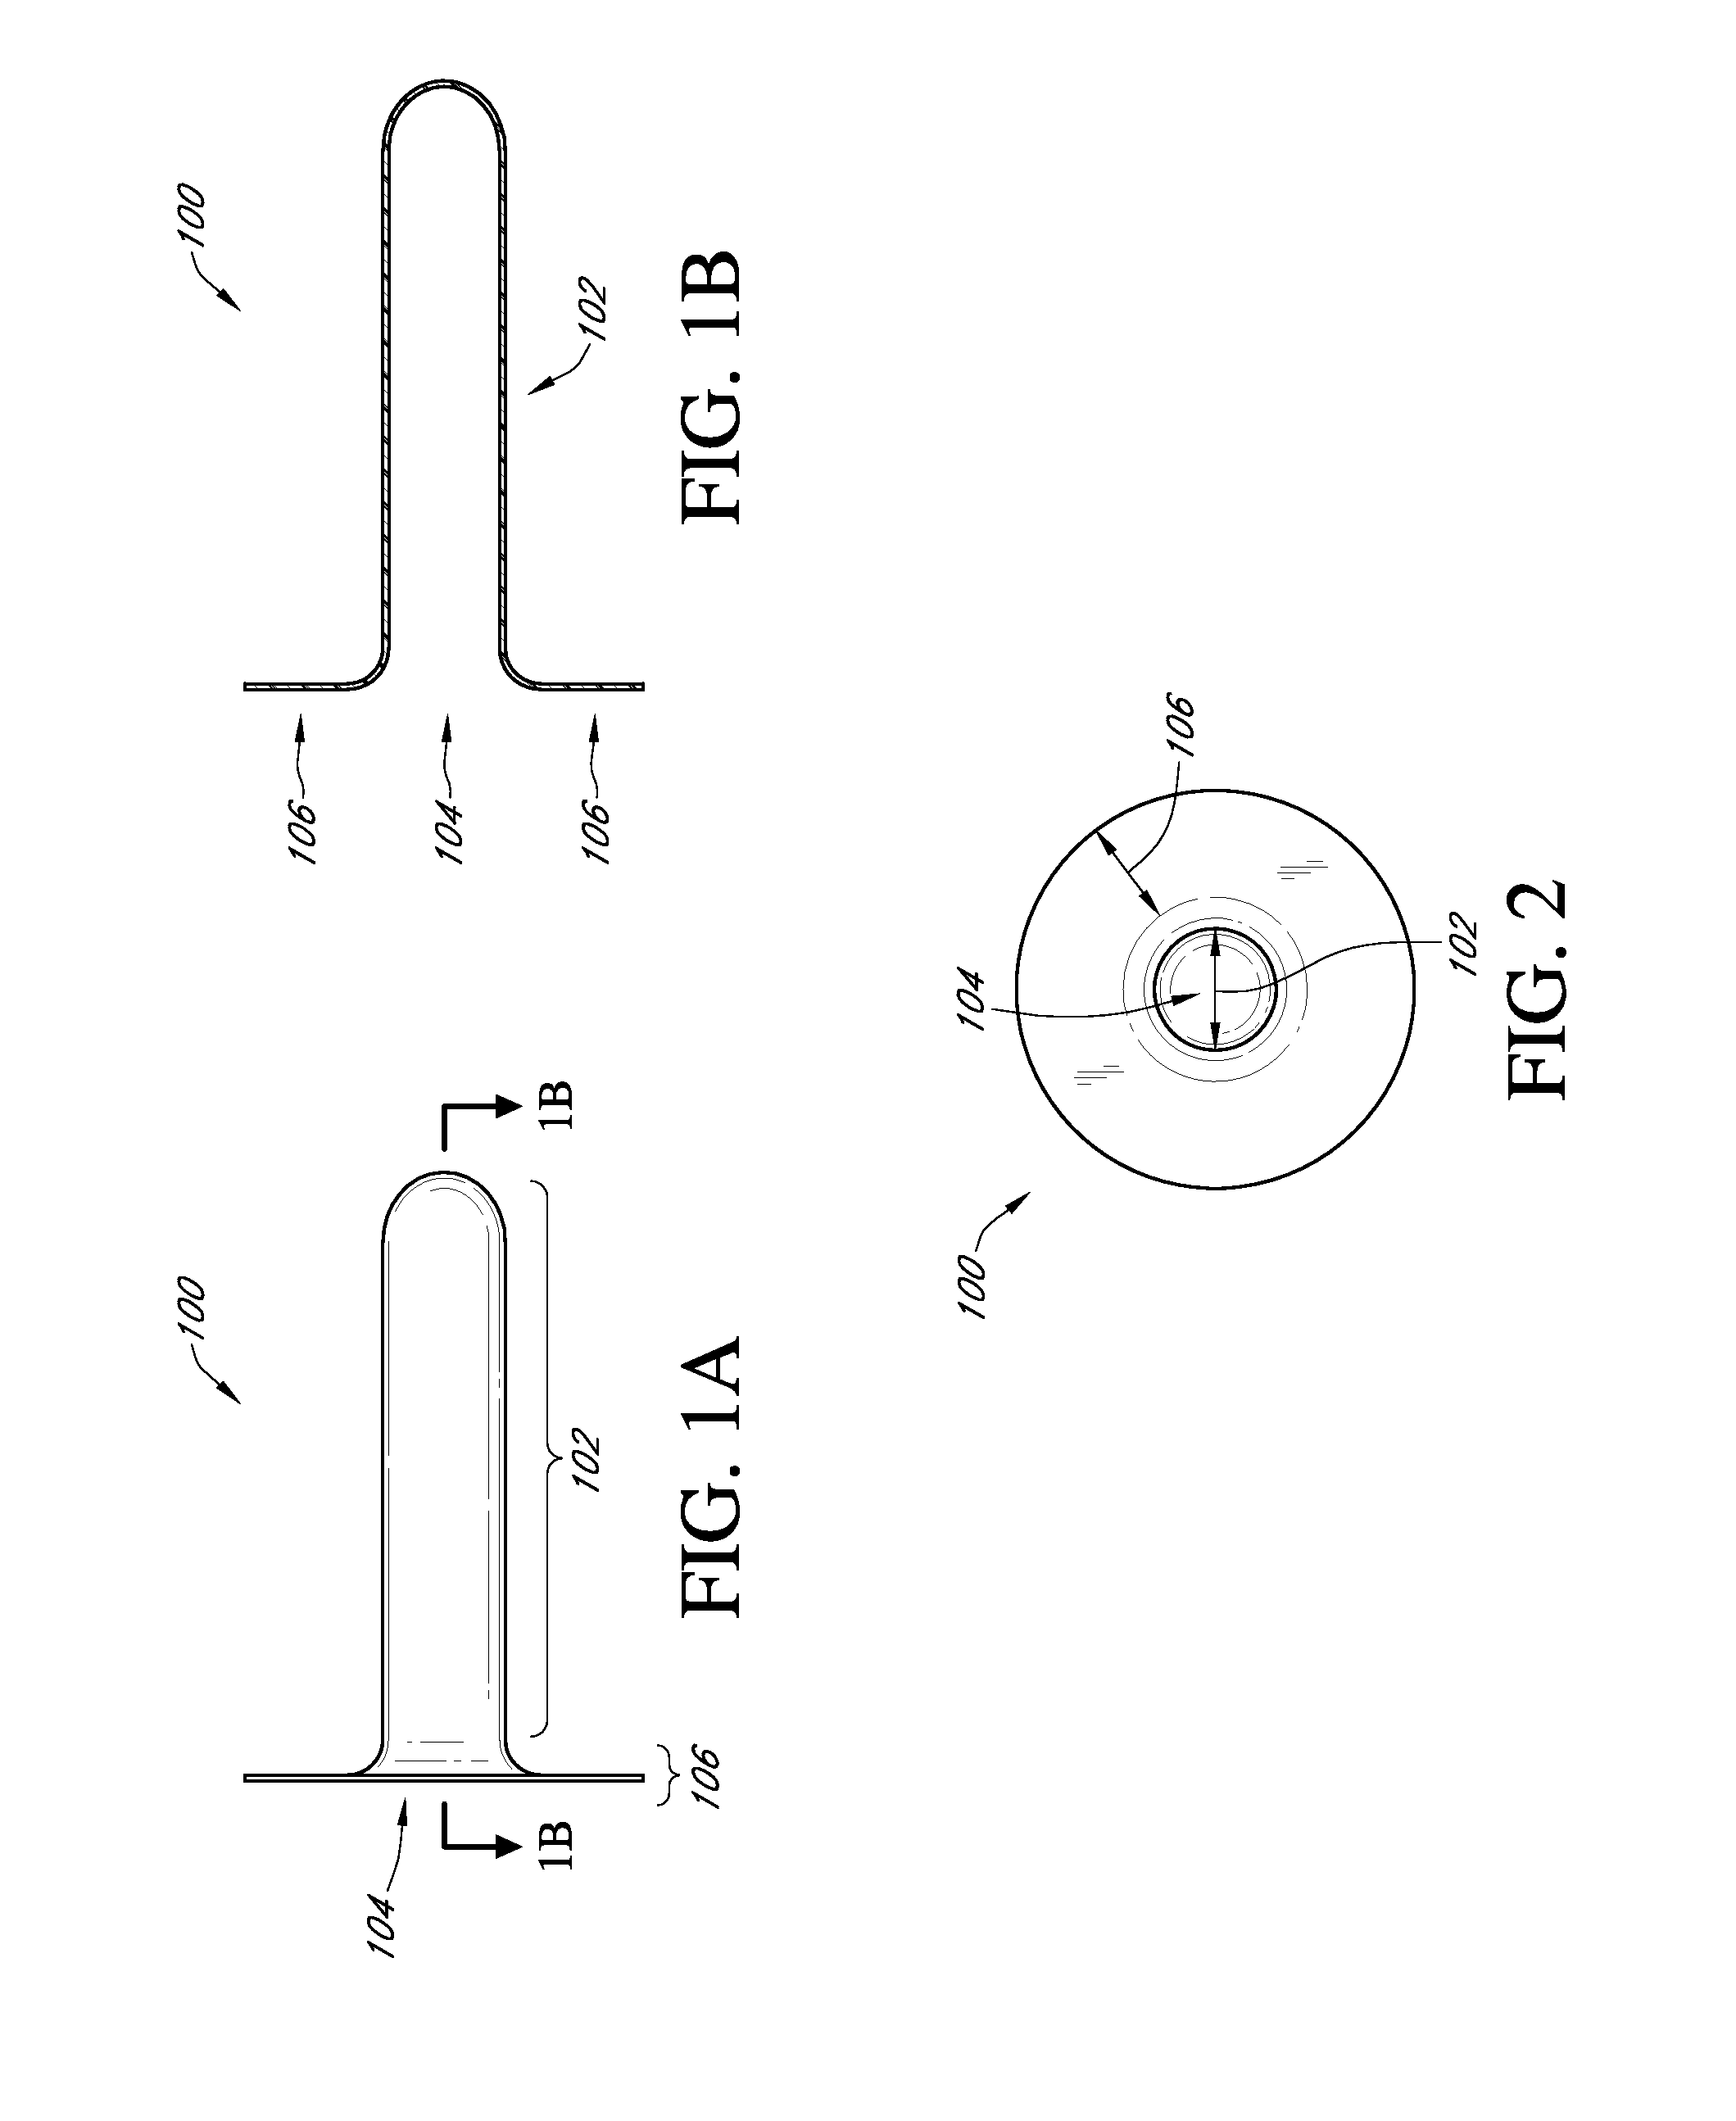 Single finger and dual finger medication delivery devices, systems and kits; and methods of using the same